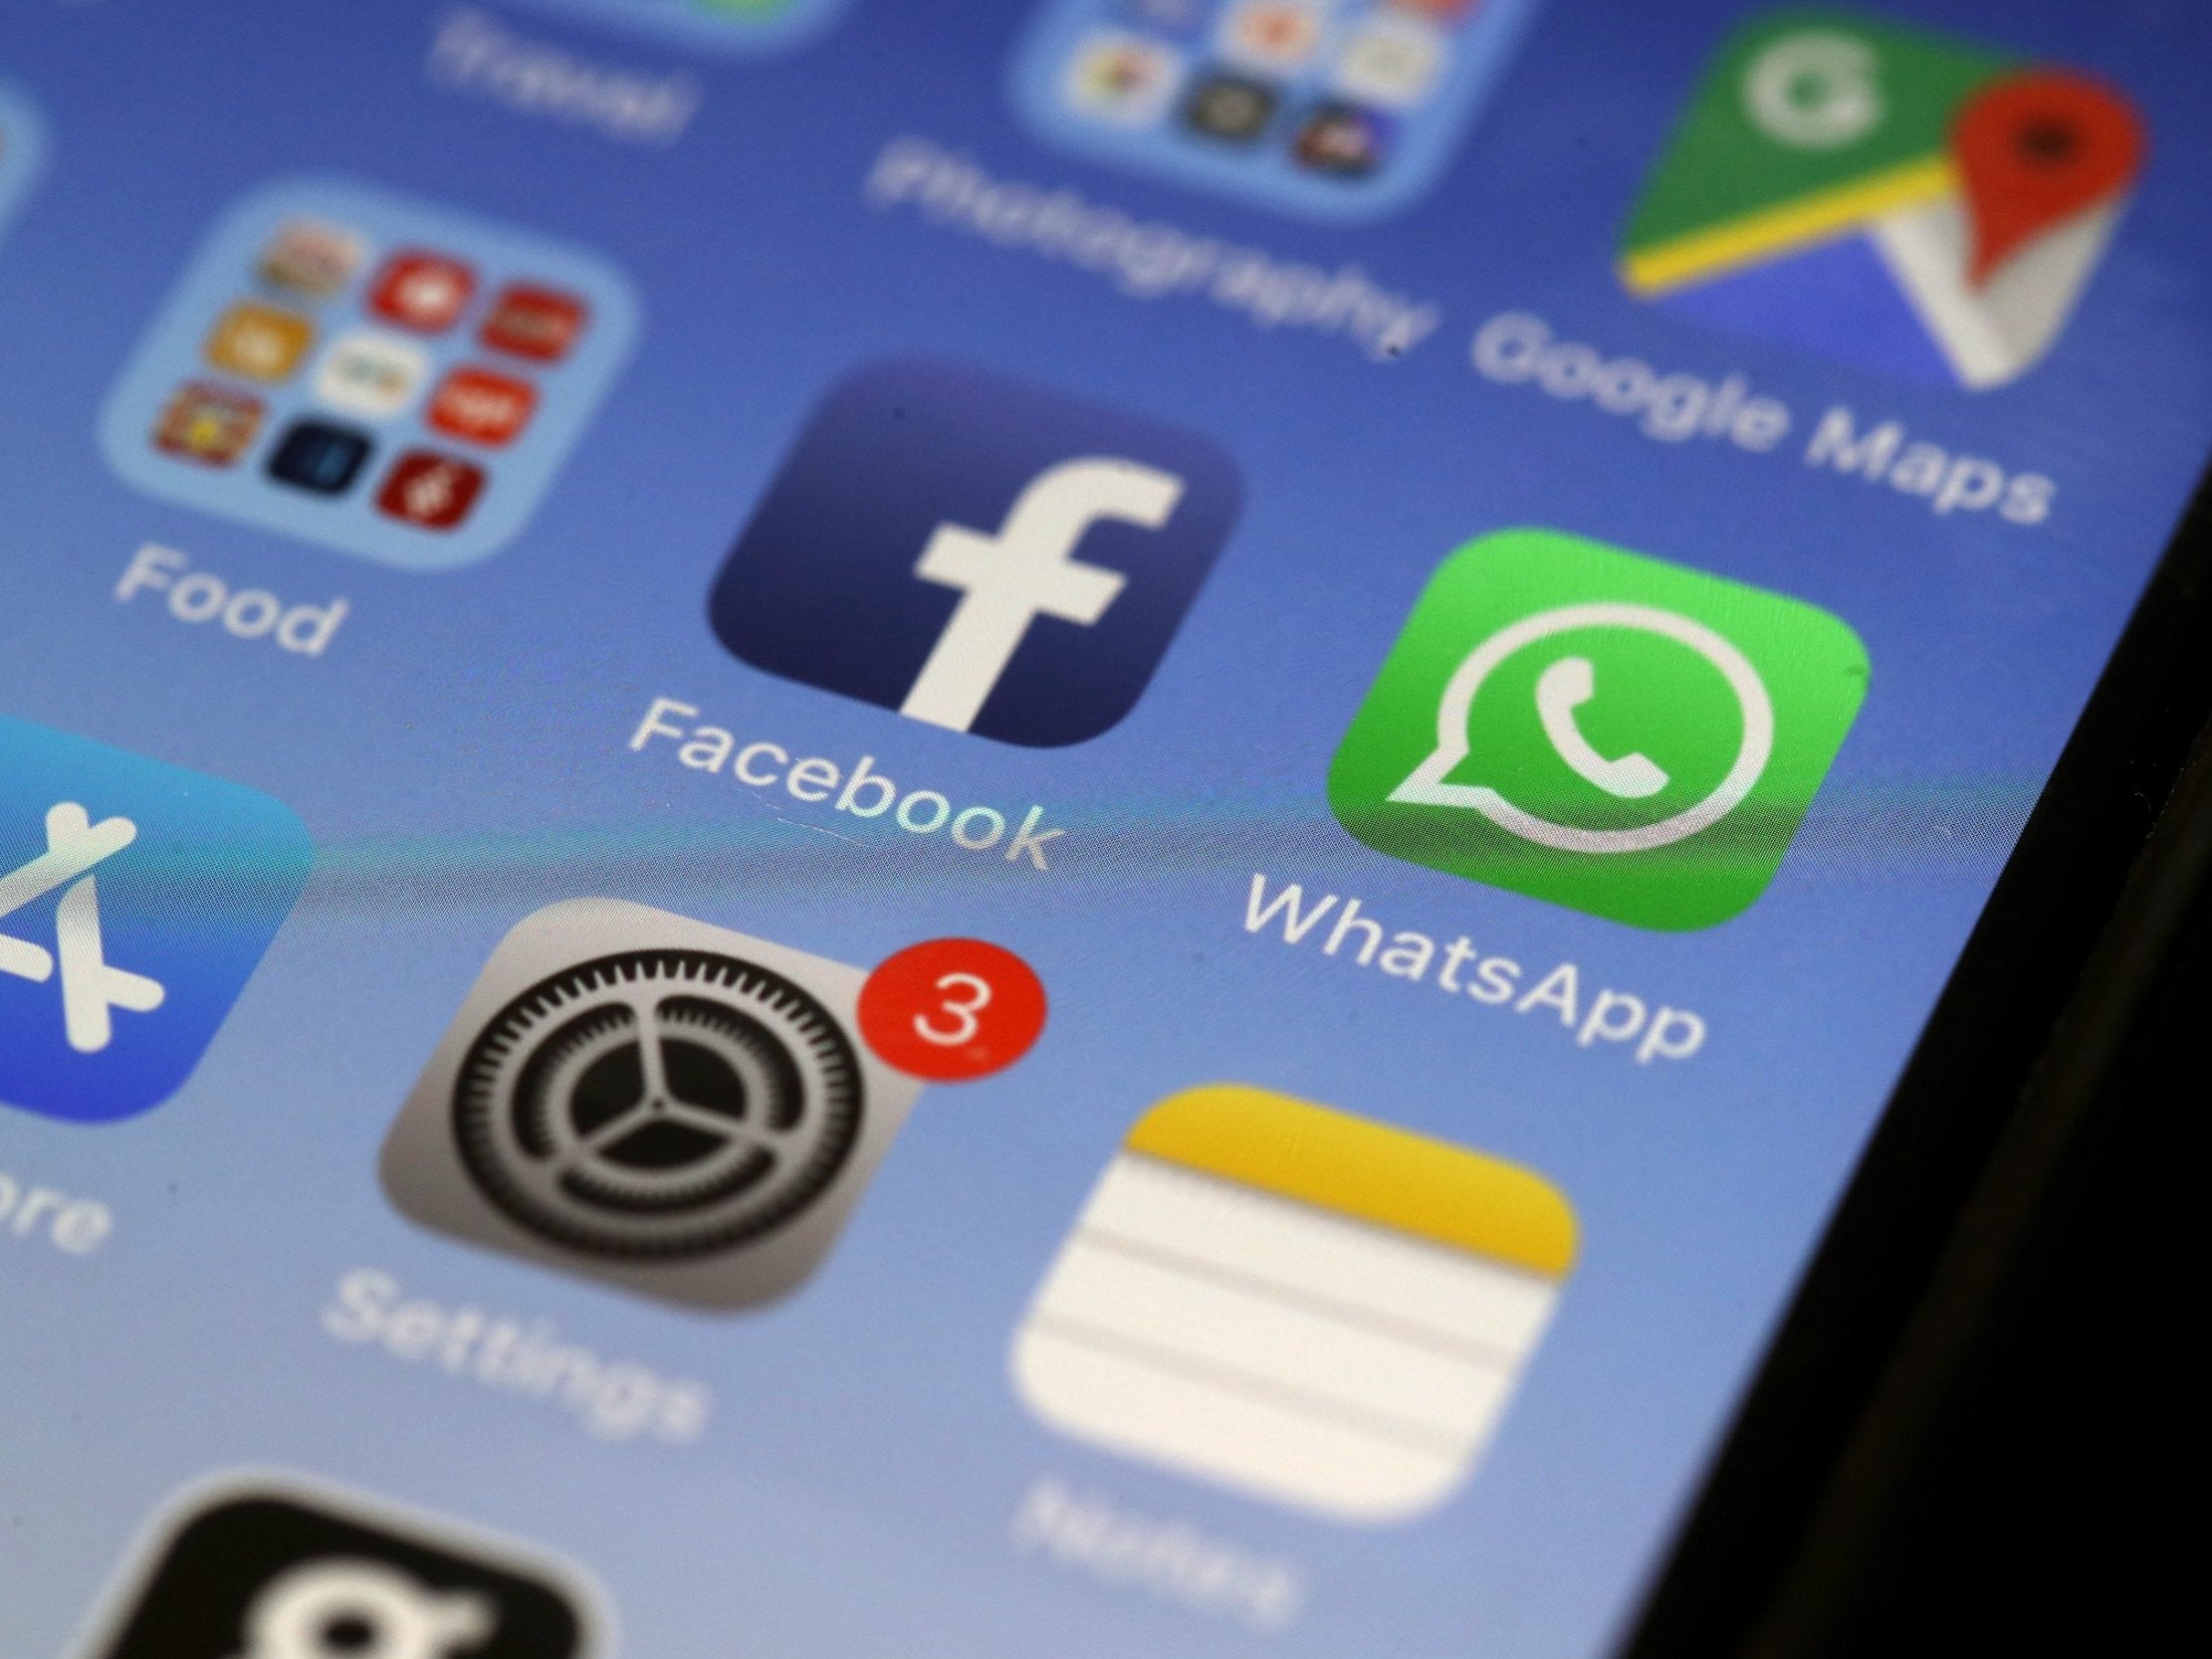 The WhatsApp messaging app is displayed on an Apple iPhone